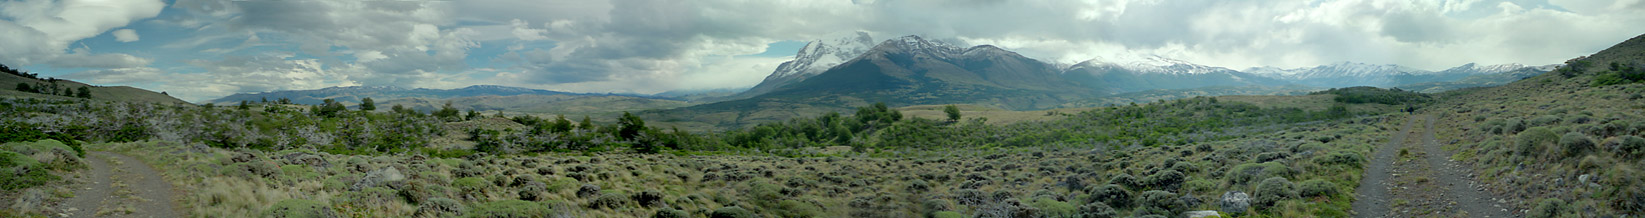 The Patagonia Steppe